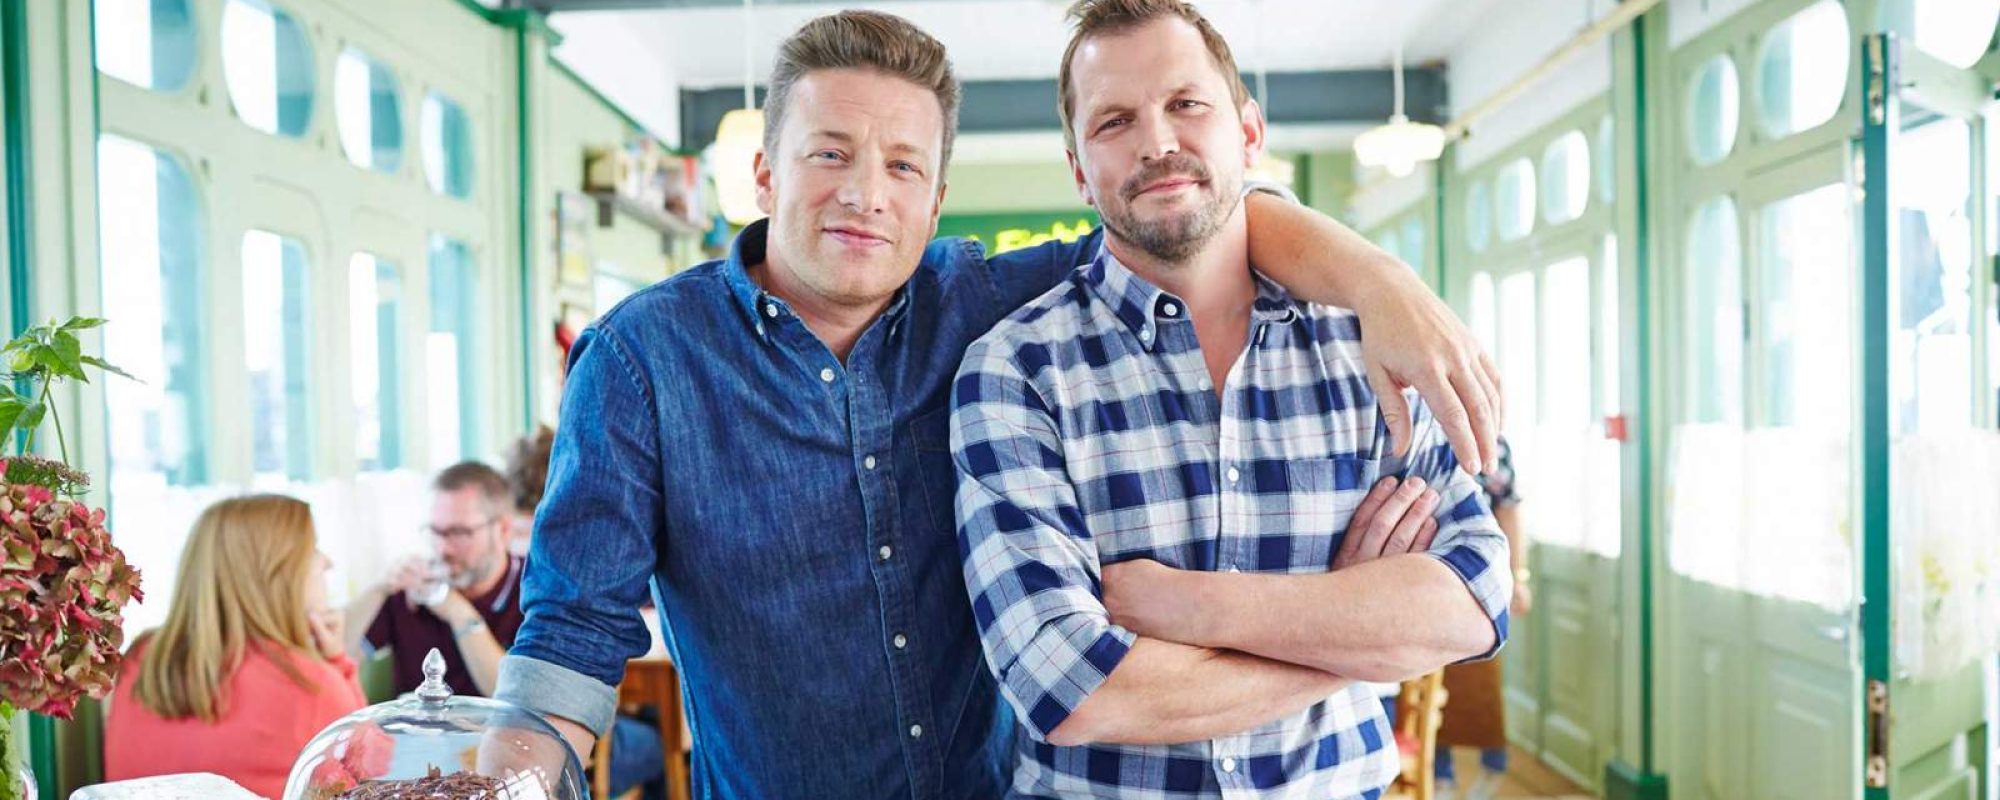 OVATION ACQUIRES RIGHTS TO TWO JAMIE OLIVER SERIES: JAMIE’S AMERICAN ROAD TRIP AND JAMIE AND JIMMY’S FOOD FIGHT CLUB